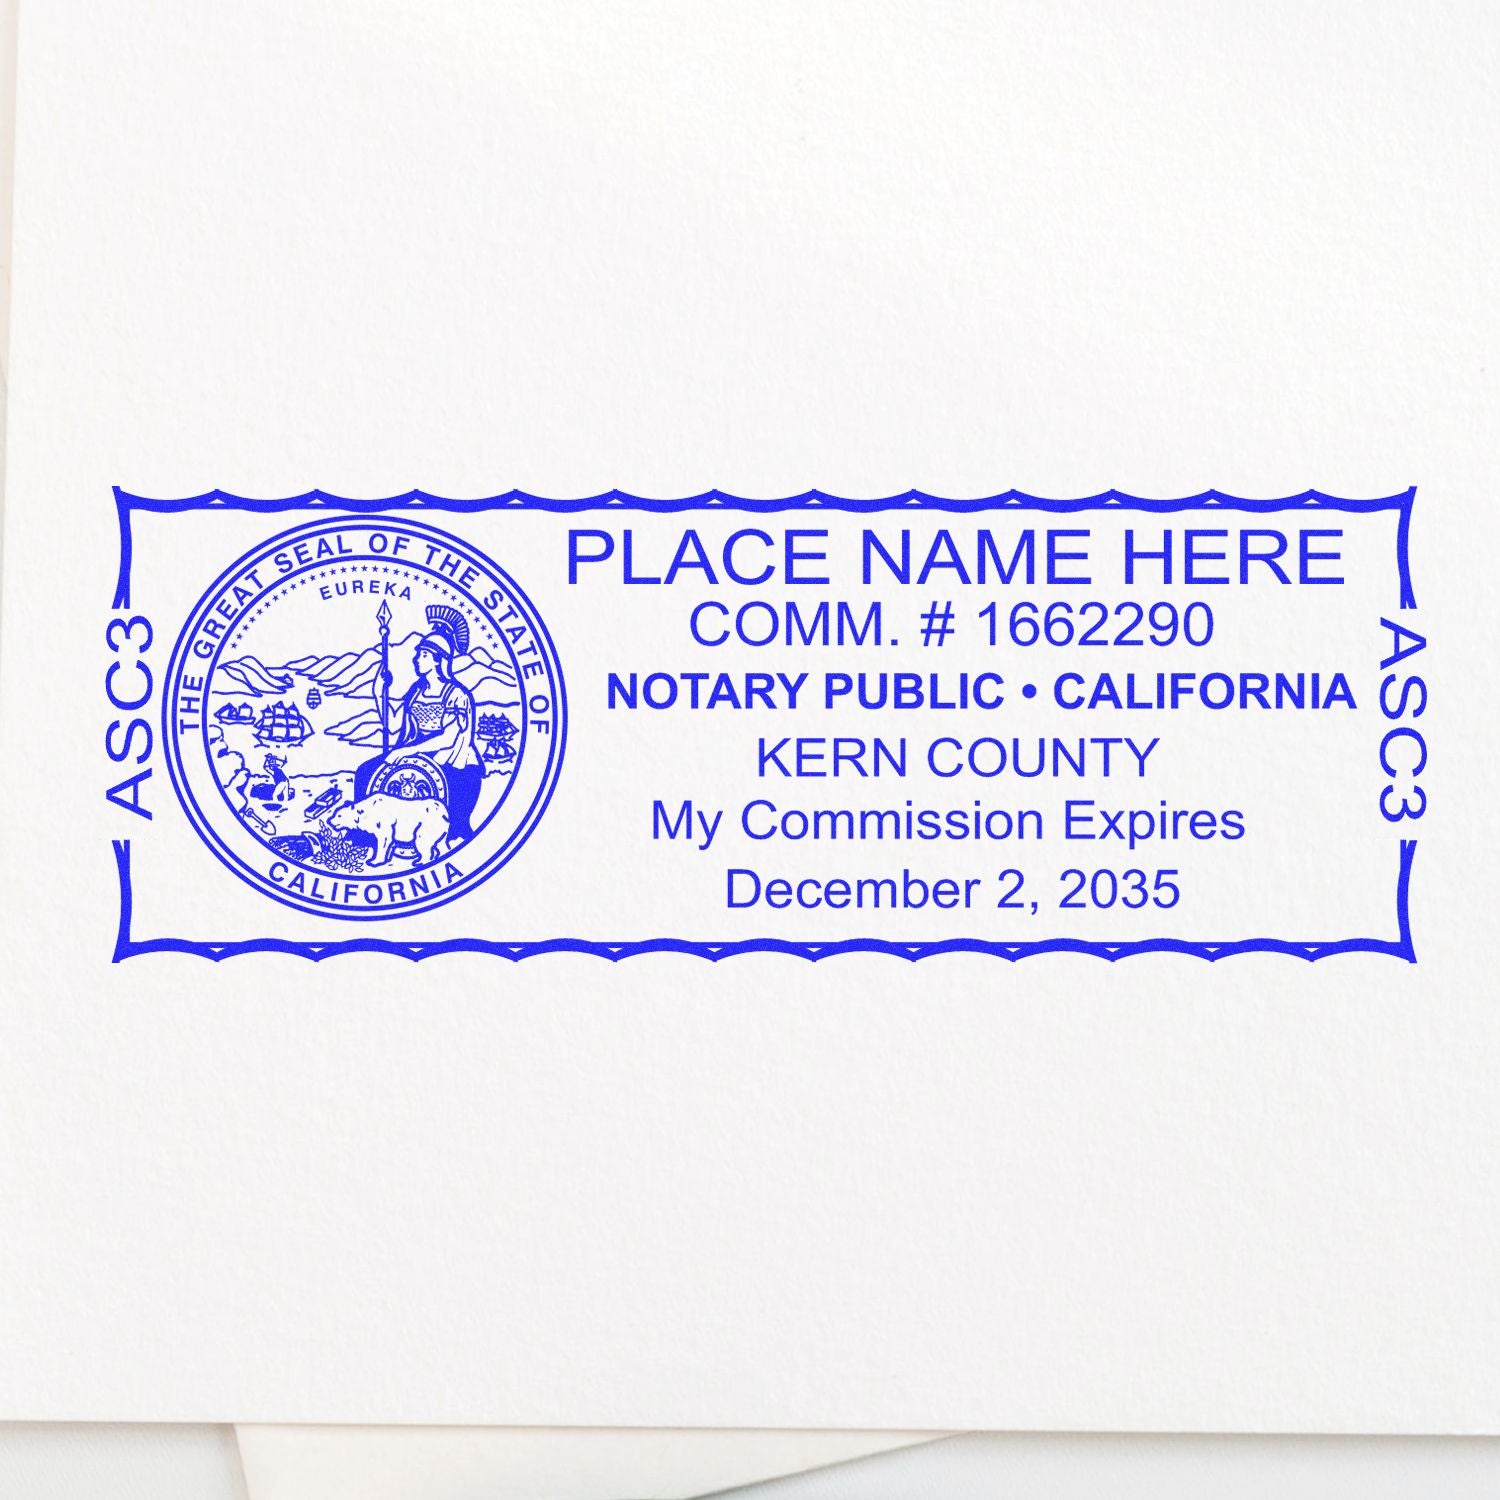 The main image for the Slim Pre-Inked State Seal Notary Stamp for California depicting a sample of the imprint and electronic files